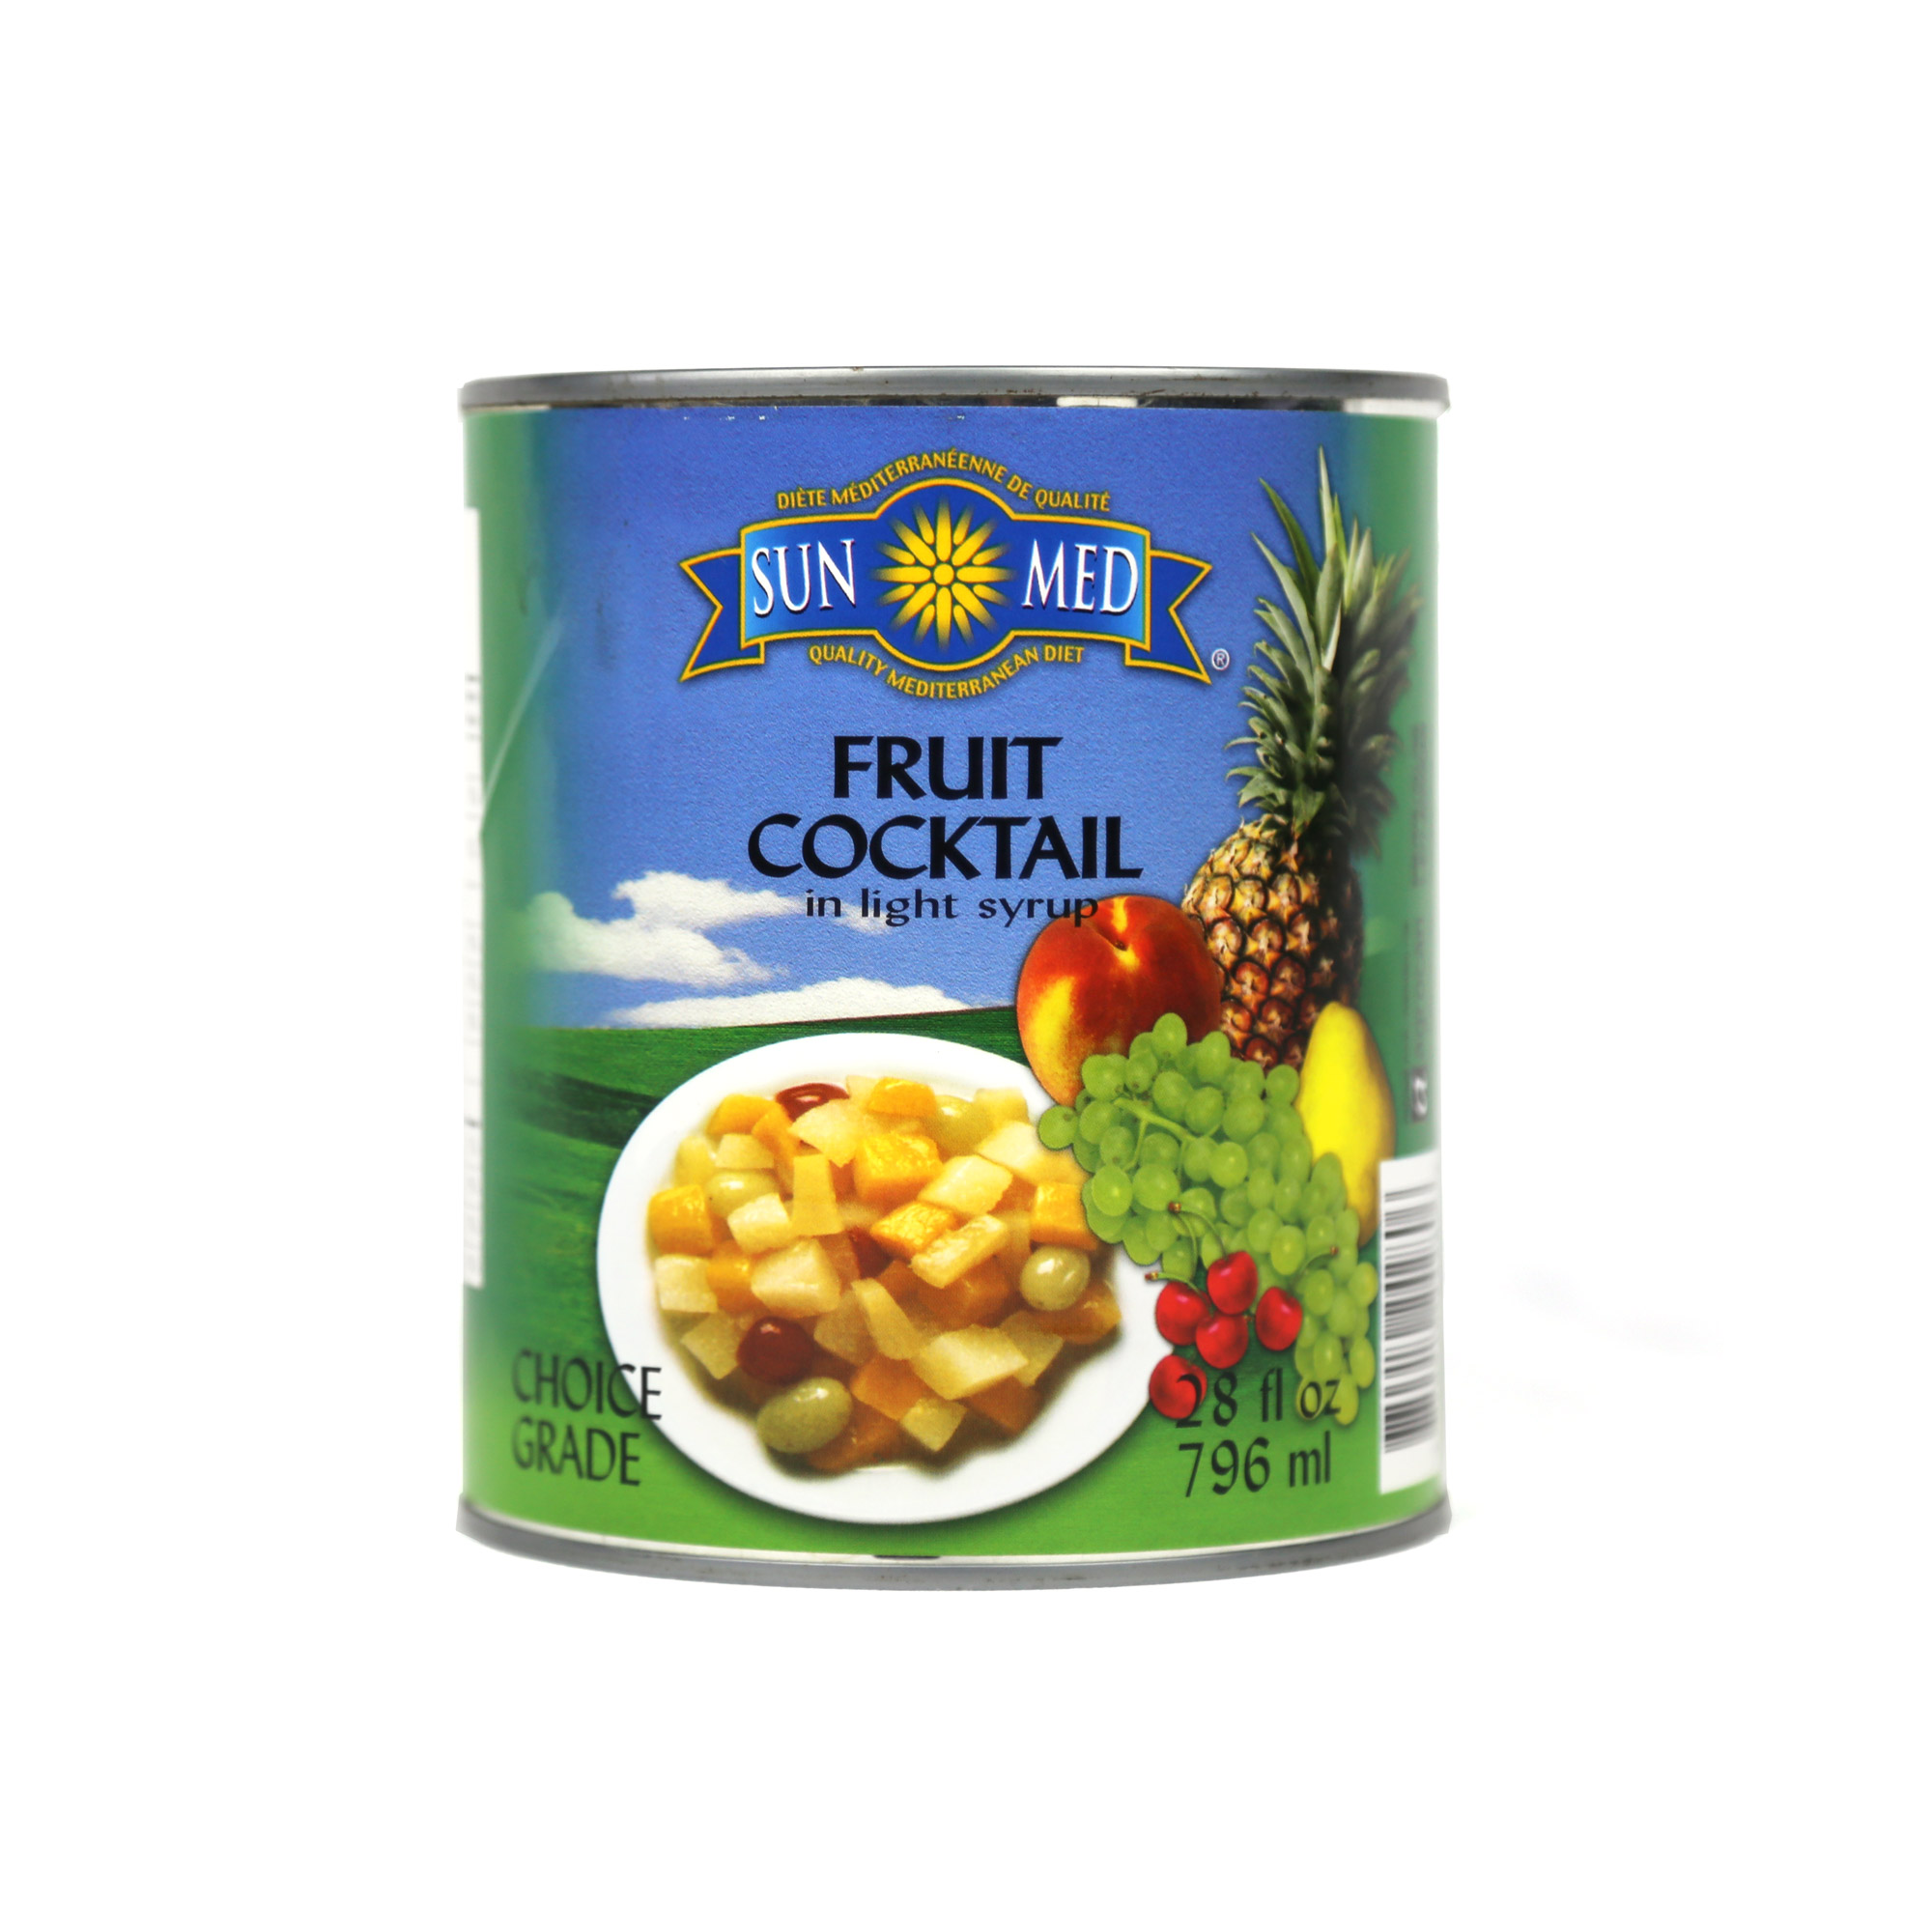 Fruit Cocktail in light syrup – 796 ml